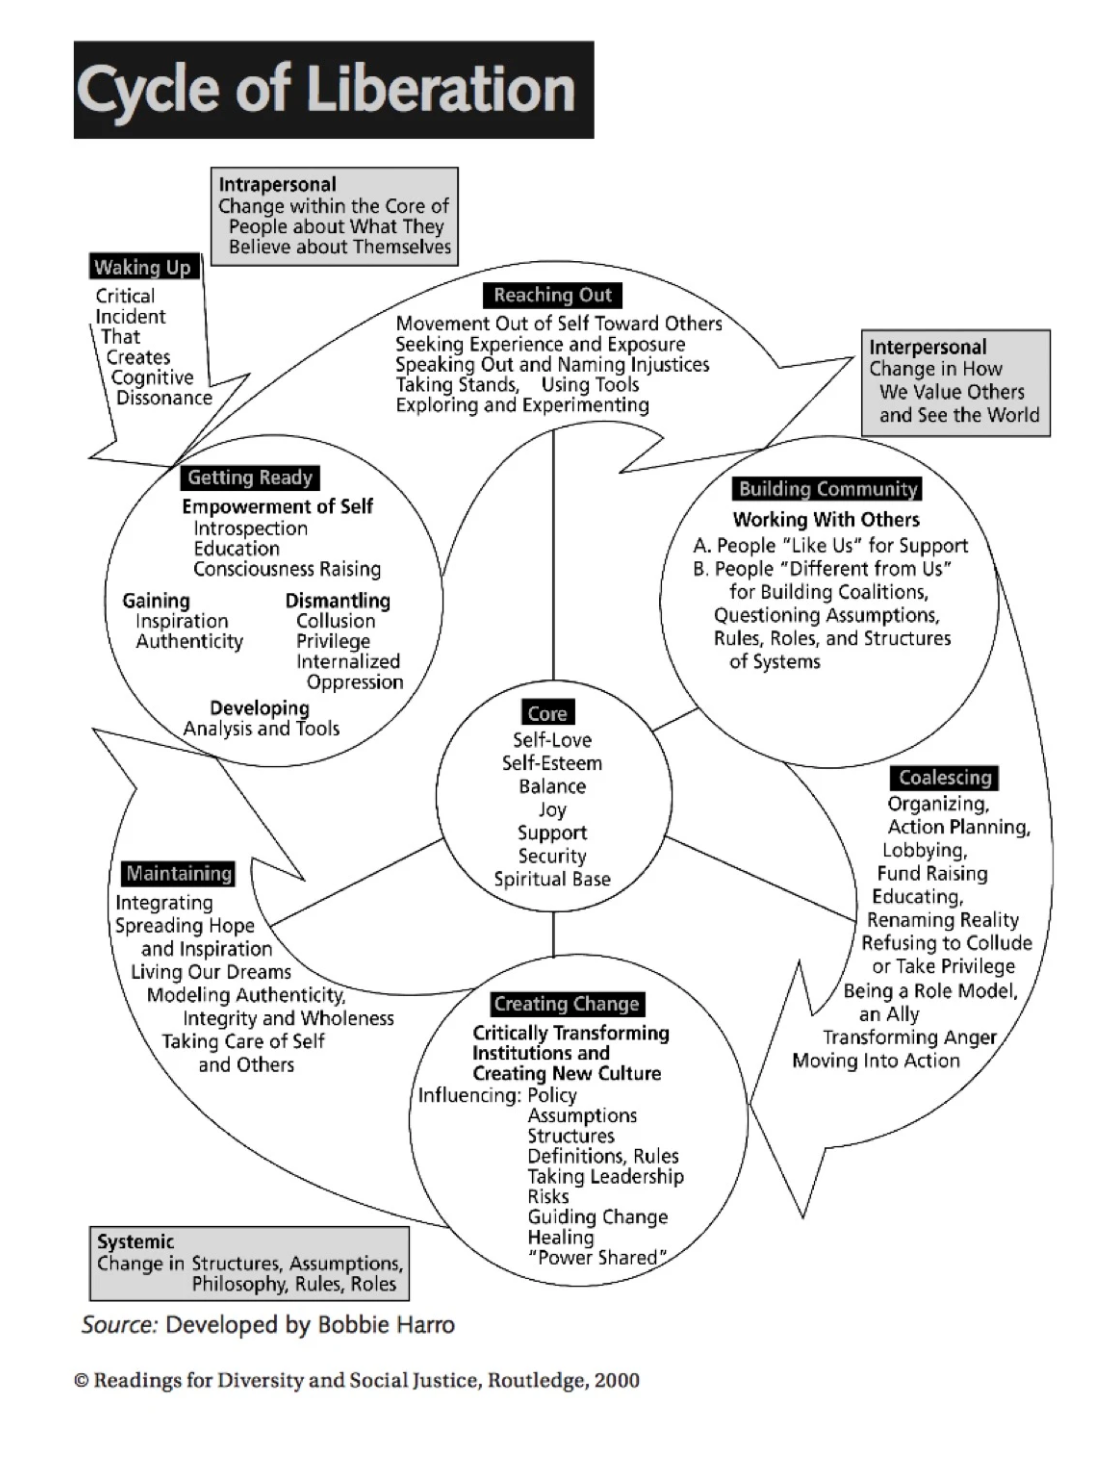 A circular diagram representing the cycle of liberation from waking up, getting ready, reaching out, interpersonal, building community, coalescing, creating change, and maintaining.